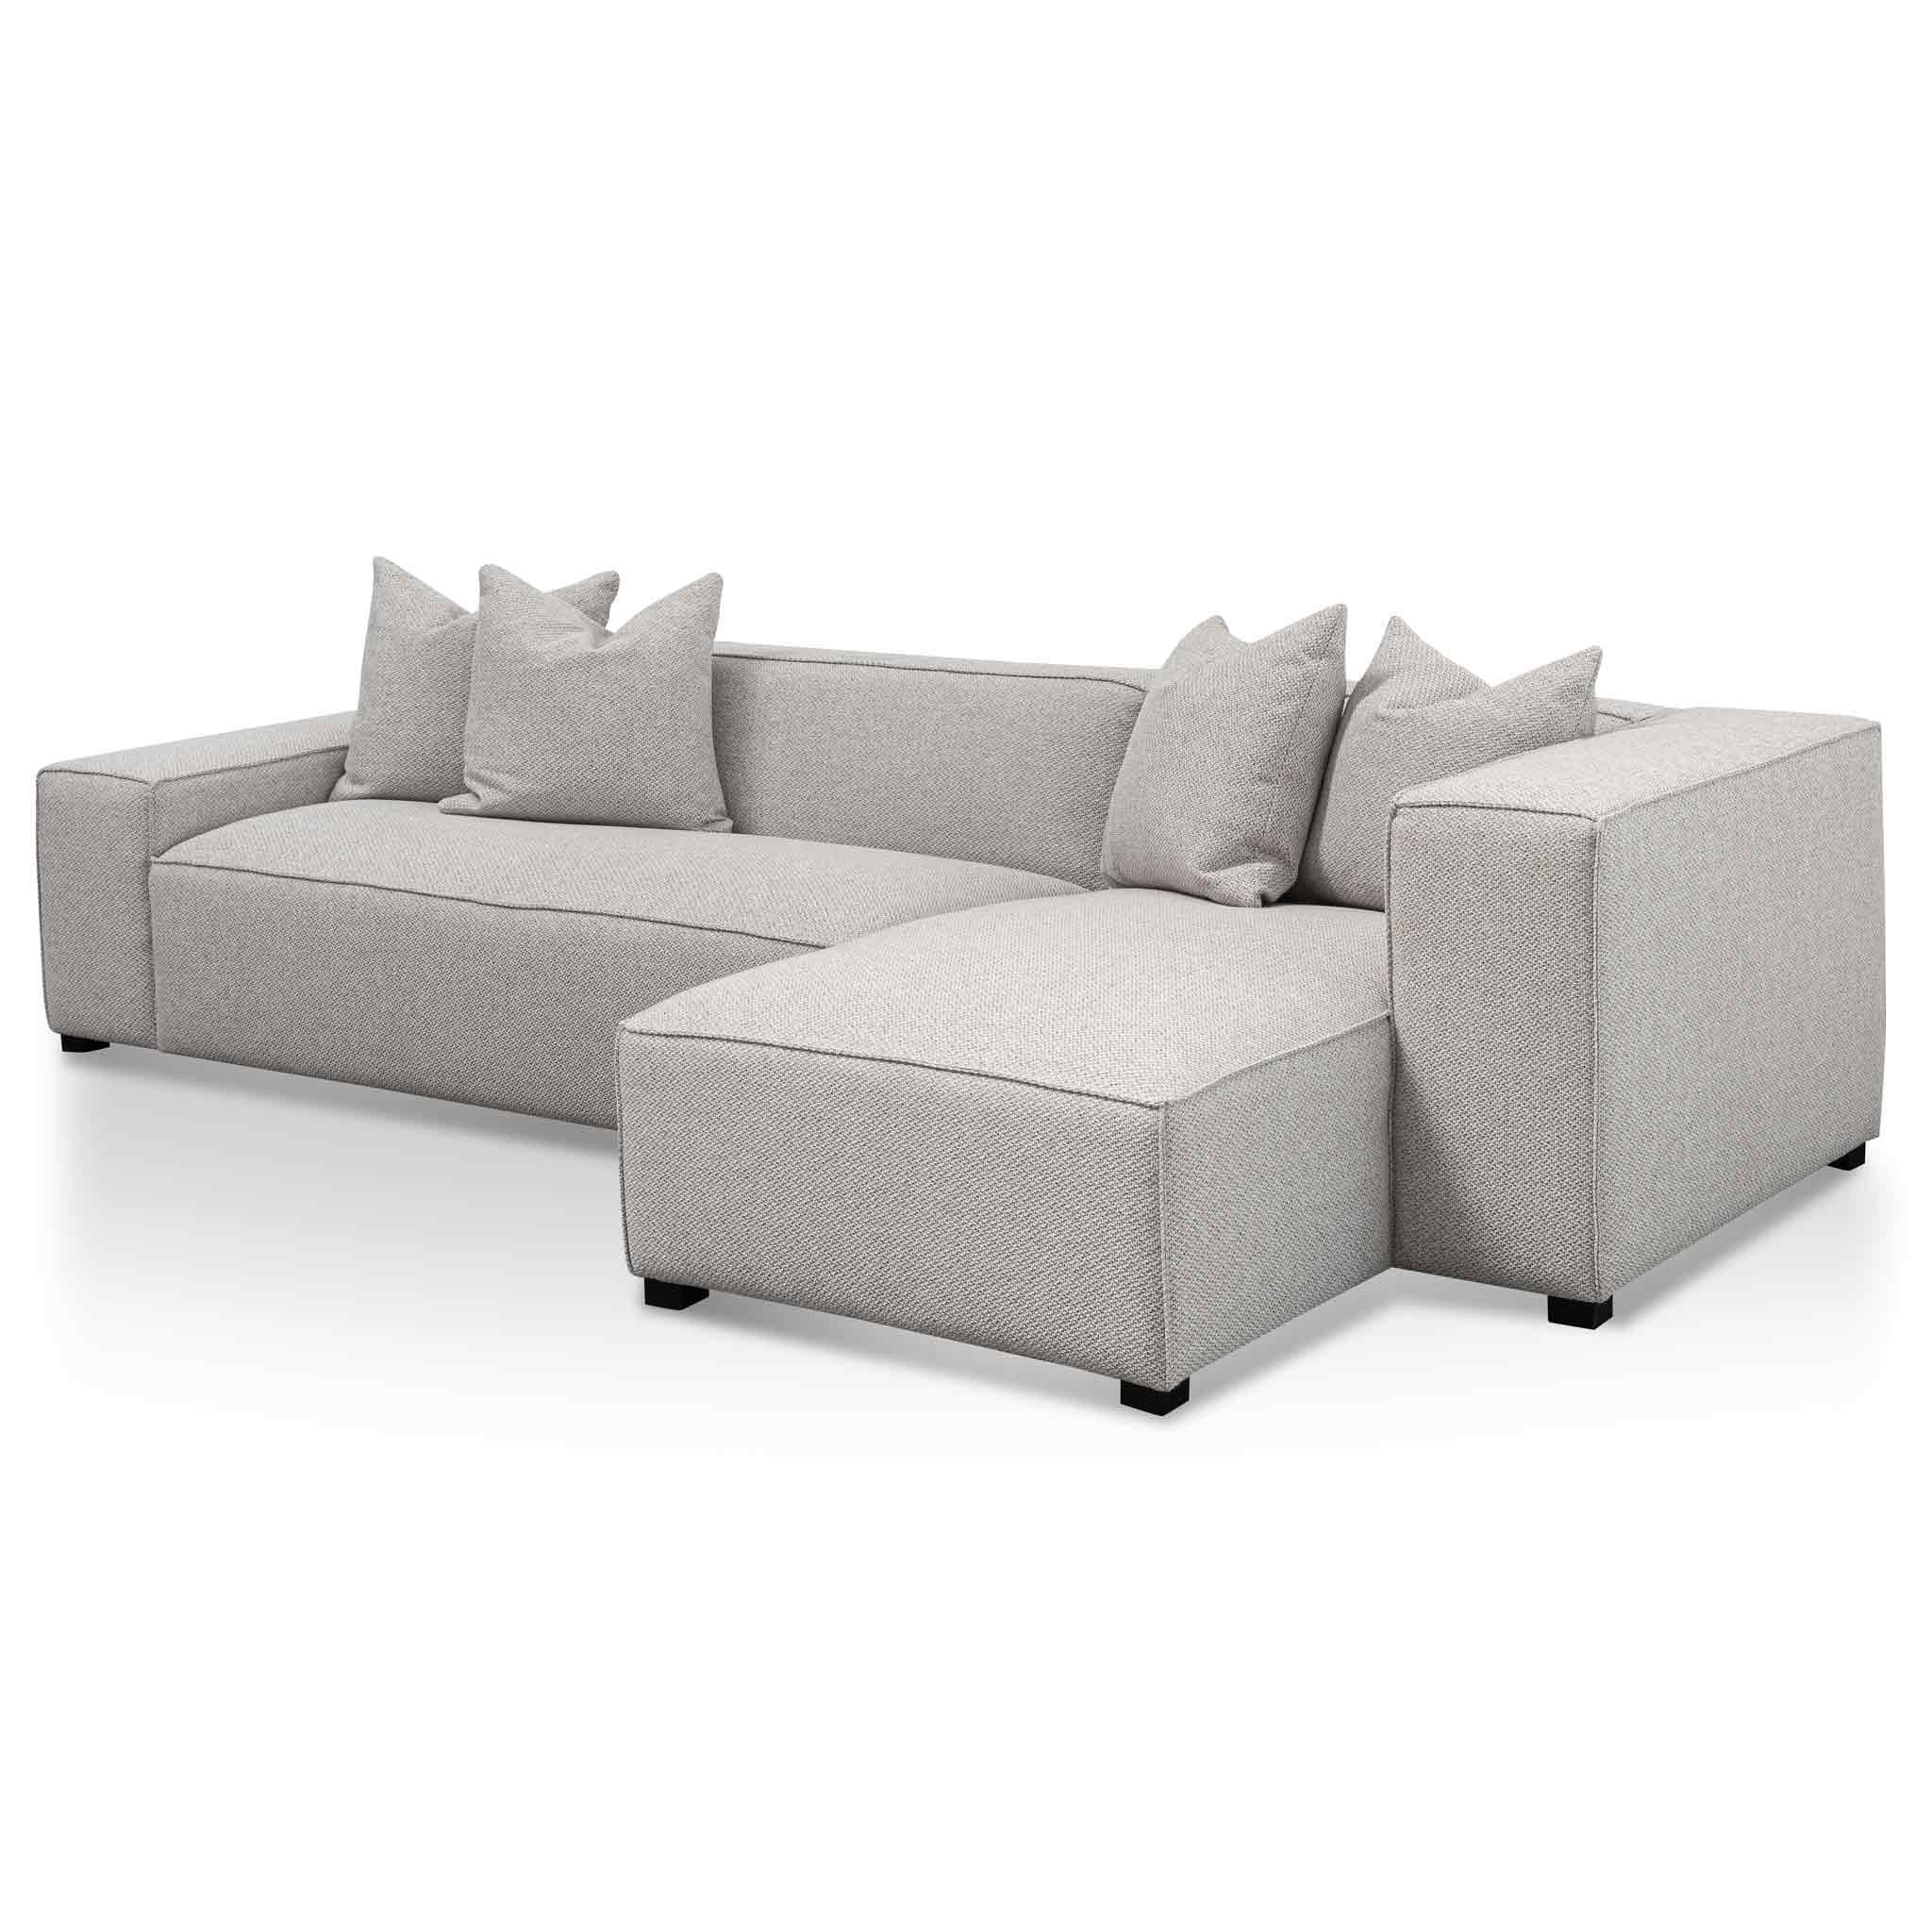 Scarlett 3 Seater Right Chaise Fabric Sofa - Sterling Grey